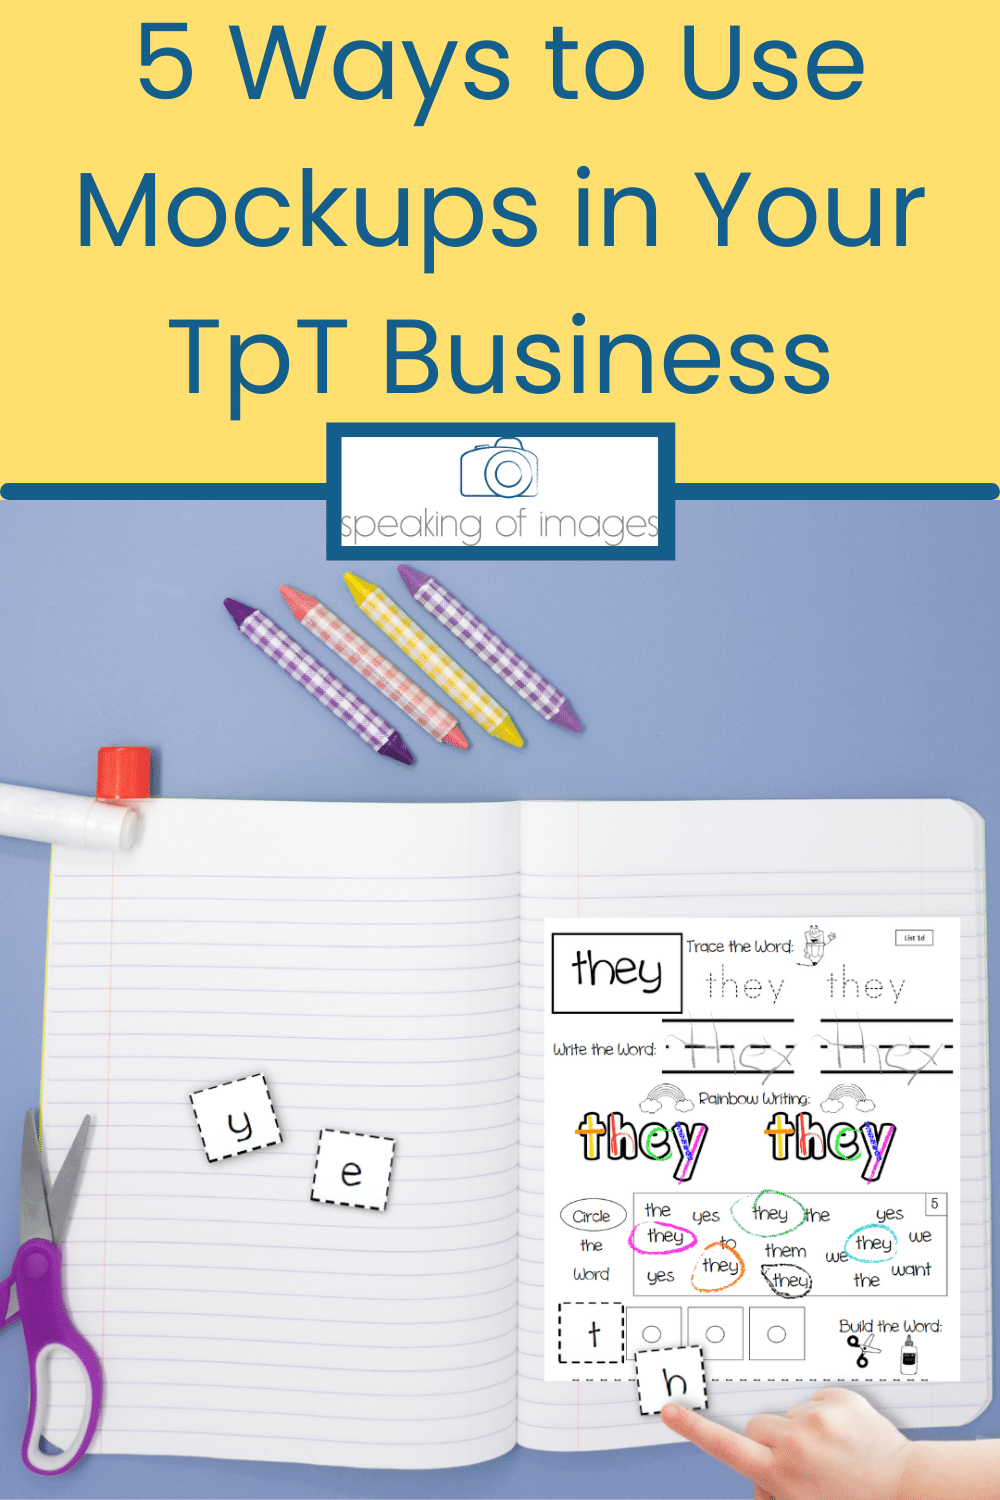 This blog post is filled with tips and ideas on ways you can use mockups in your TpT business.